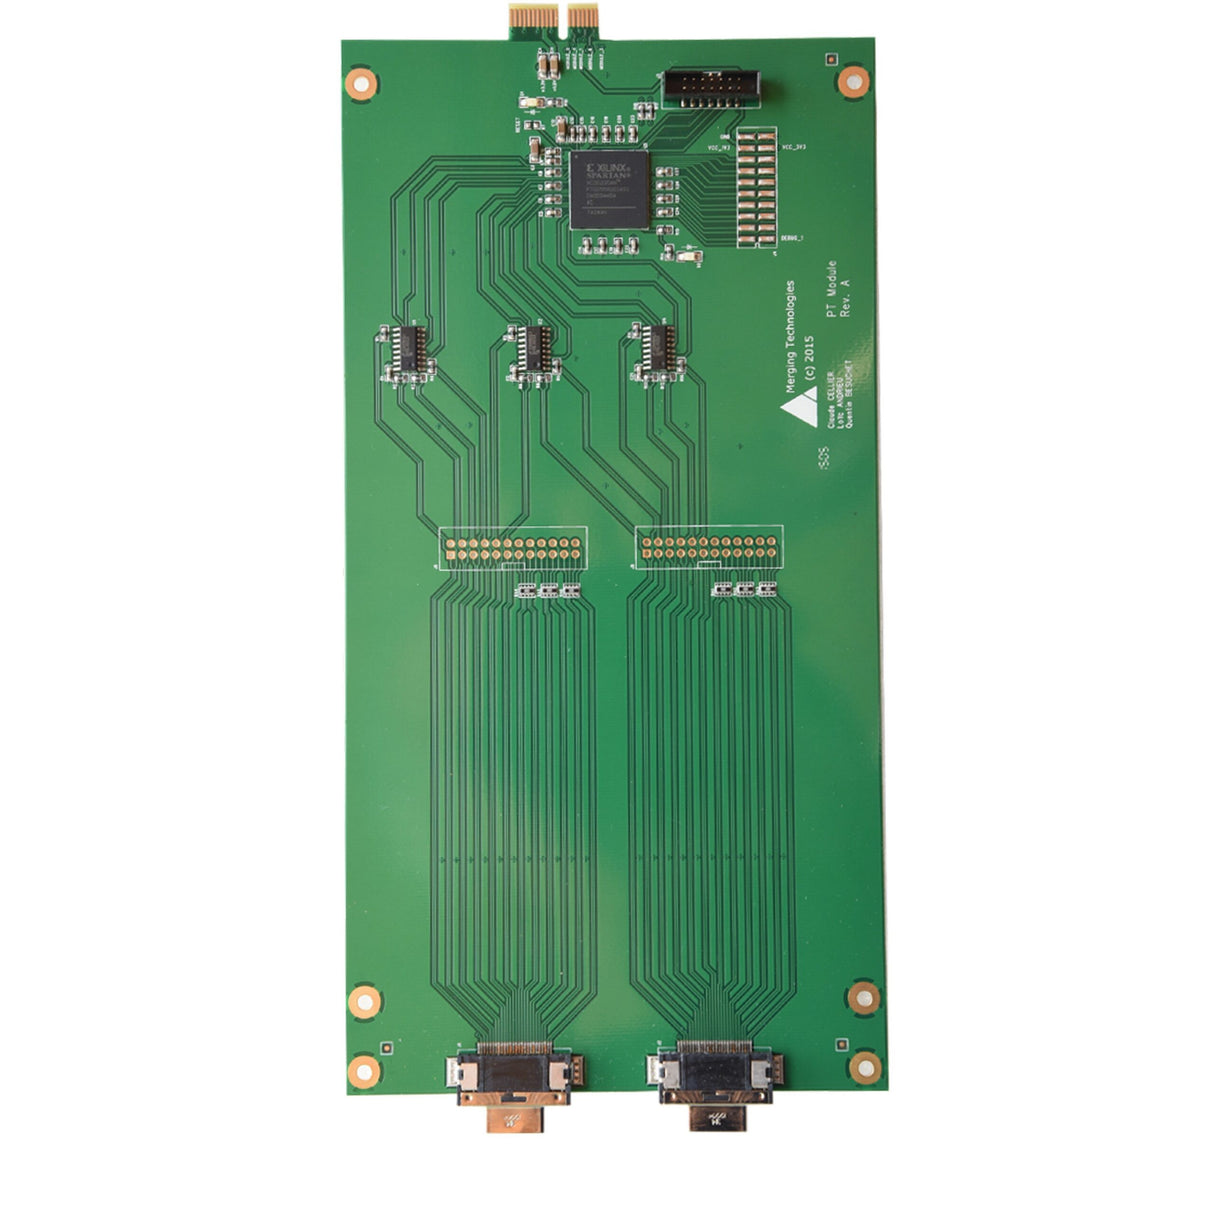 Merging Technologies PT64 Card for Pro Tools HD Connectivity